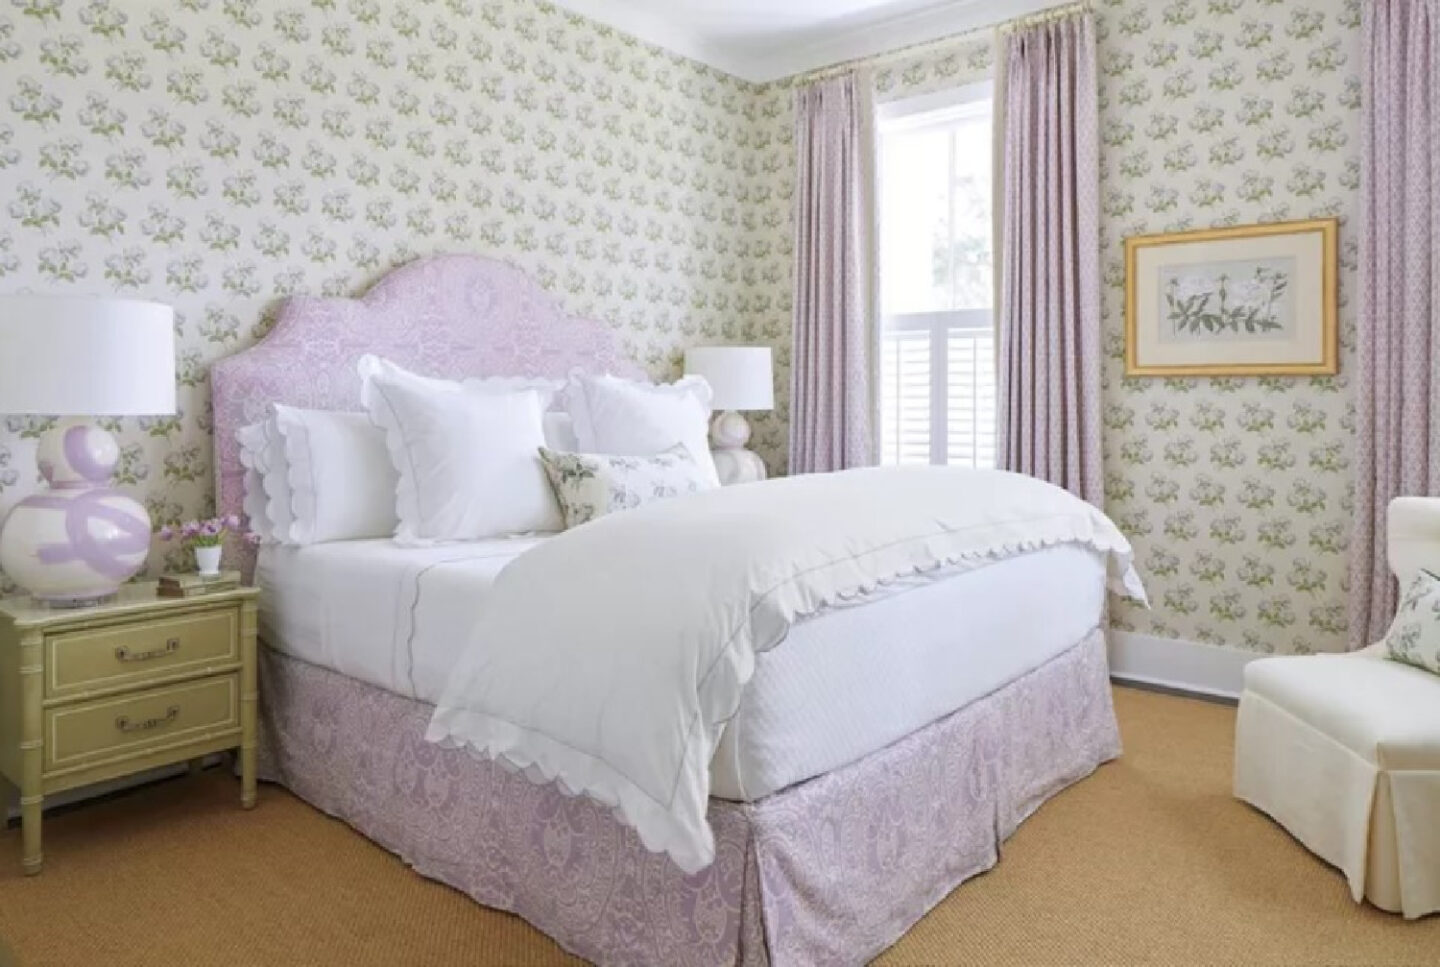 Traditional bedroom in Charleston with Colefax & Fowler's Boxwood Chintz and lavender accents - Julia Berolzheimer's home in Southern Living (photo: Hector Manuel Sanchez). #traditionalbedroom #boxwoodchintz